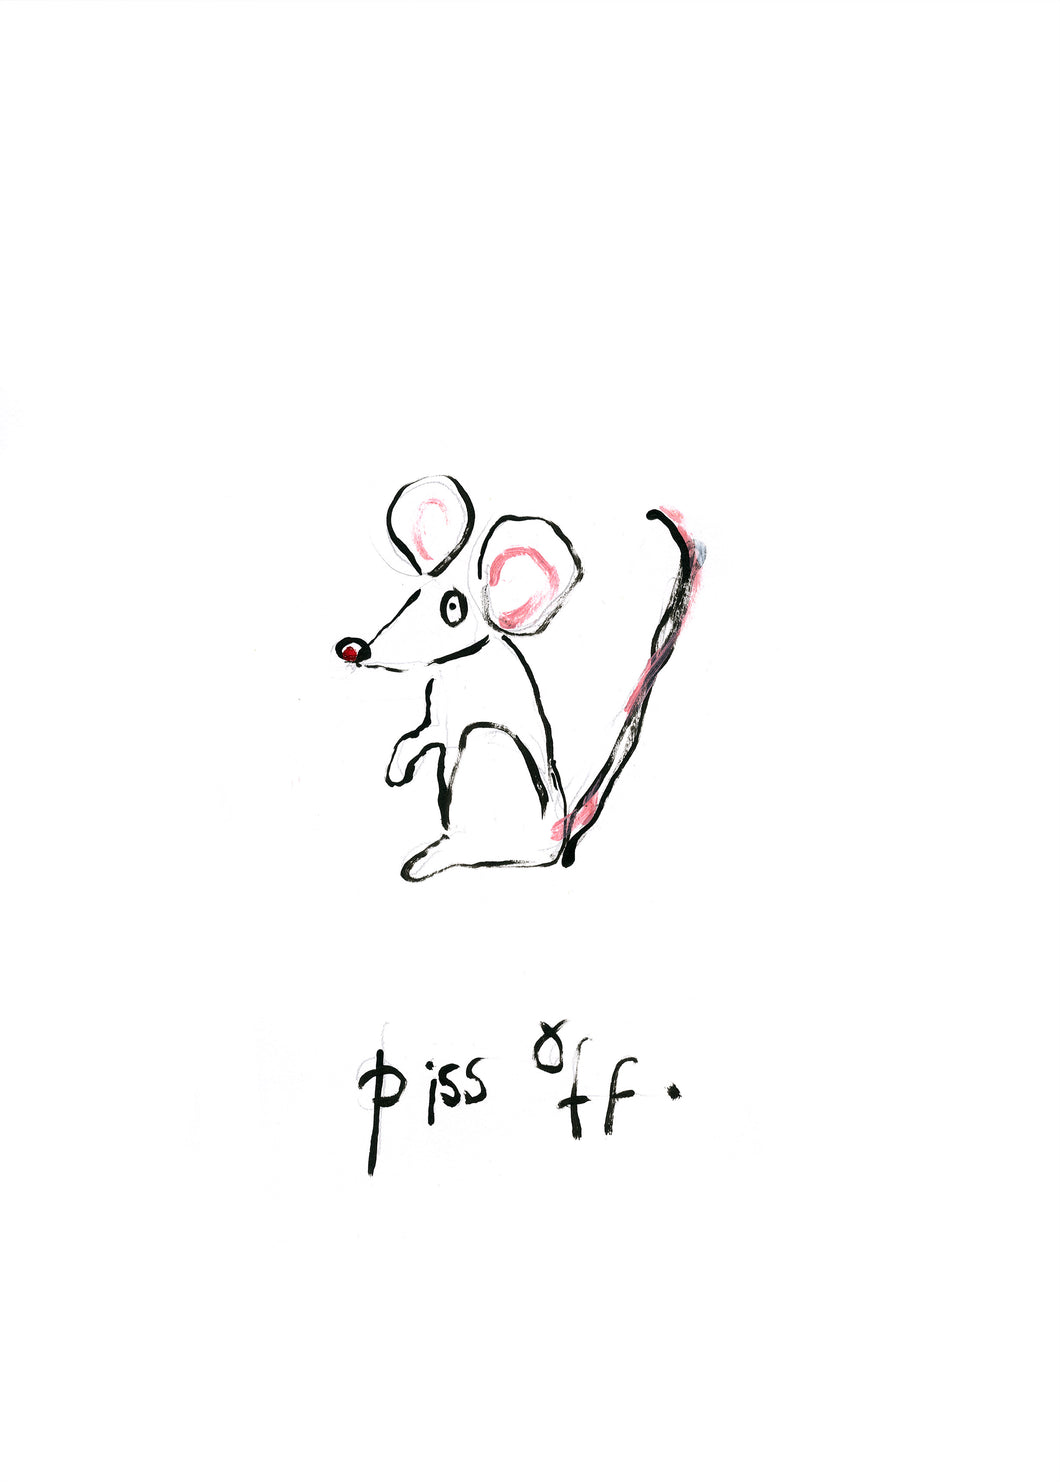 What A Cute Mouse - Signed Print